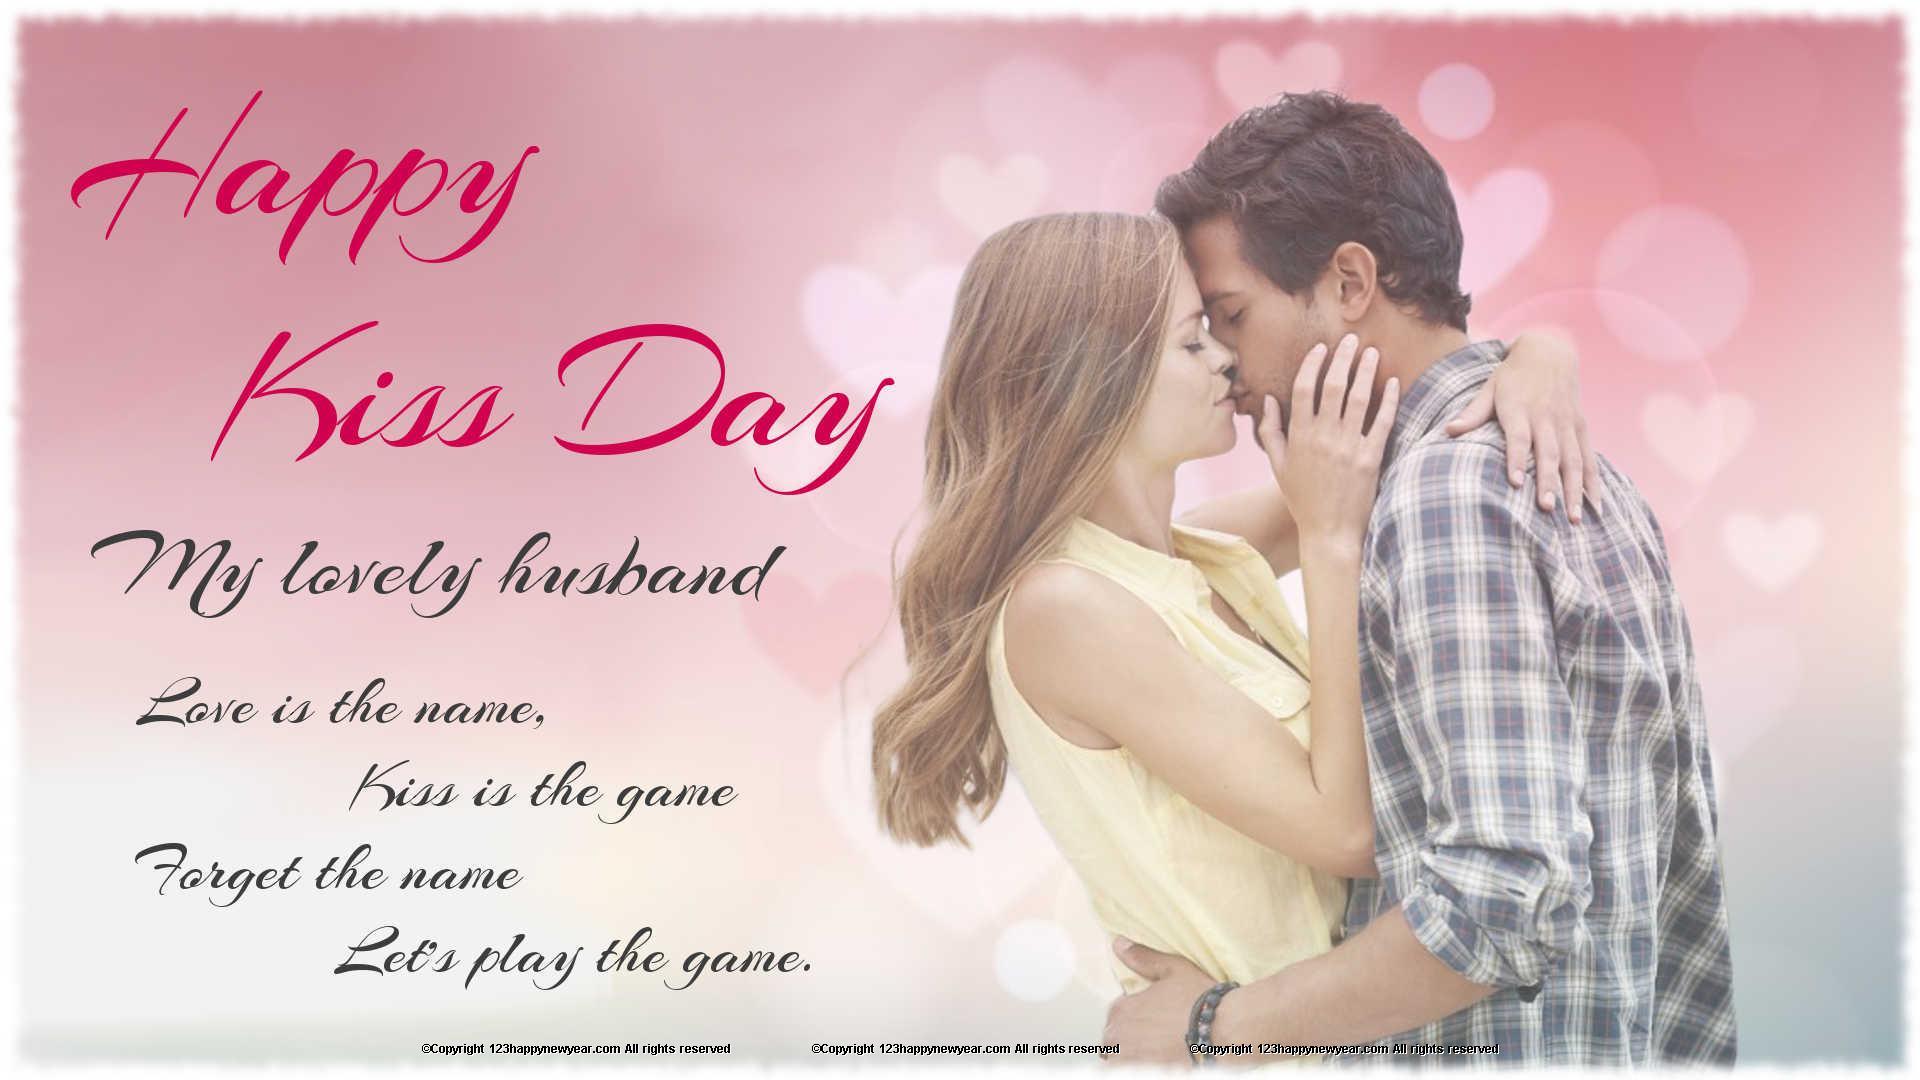 Kiss day wallpaper for husband